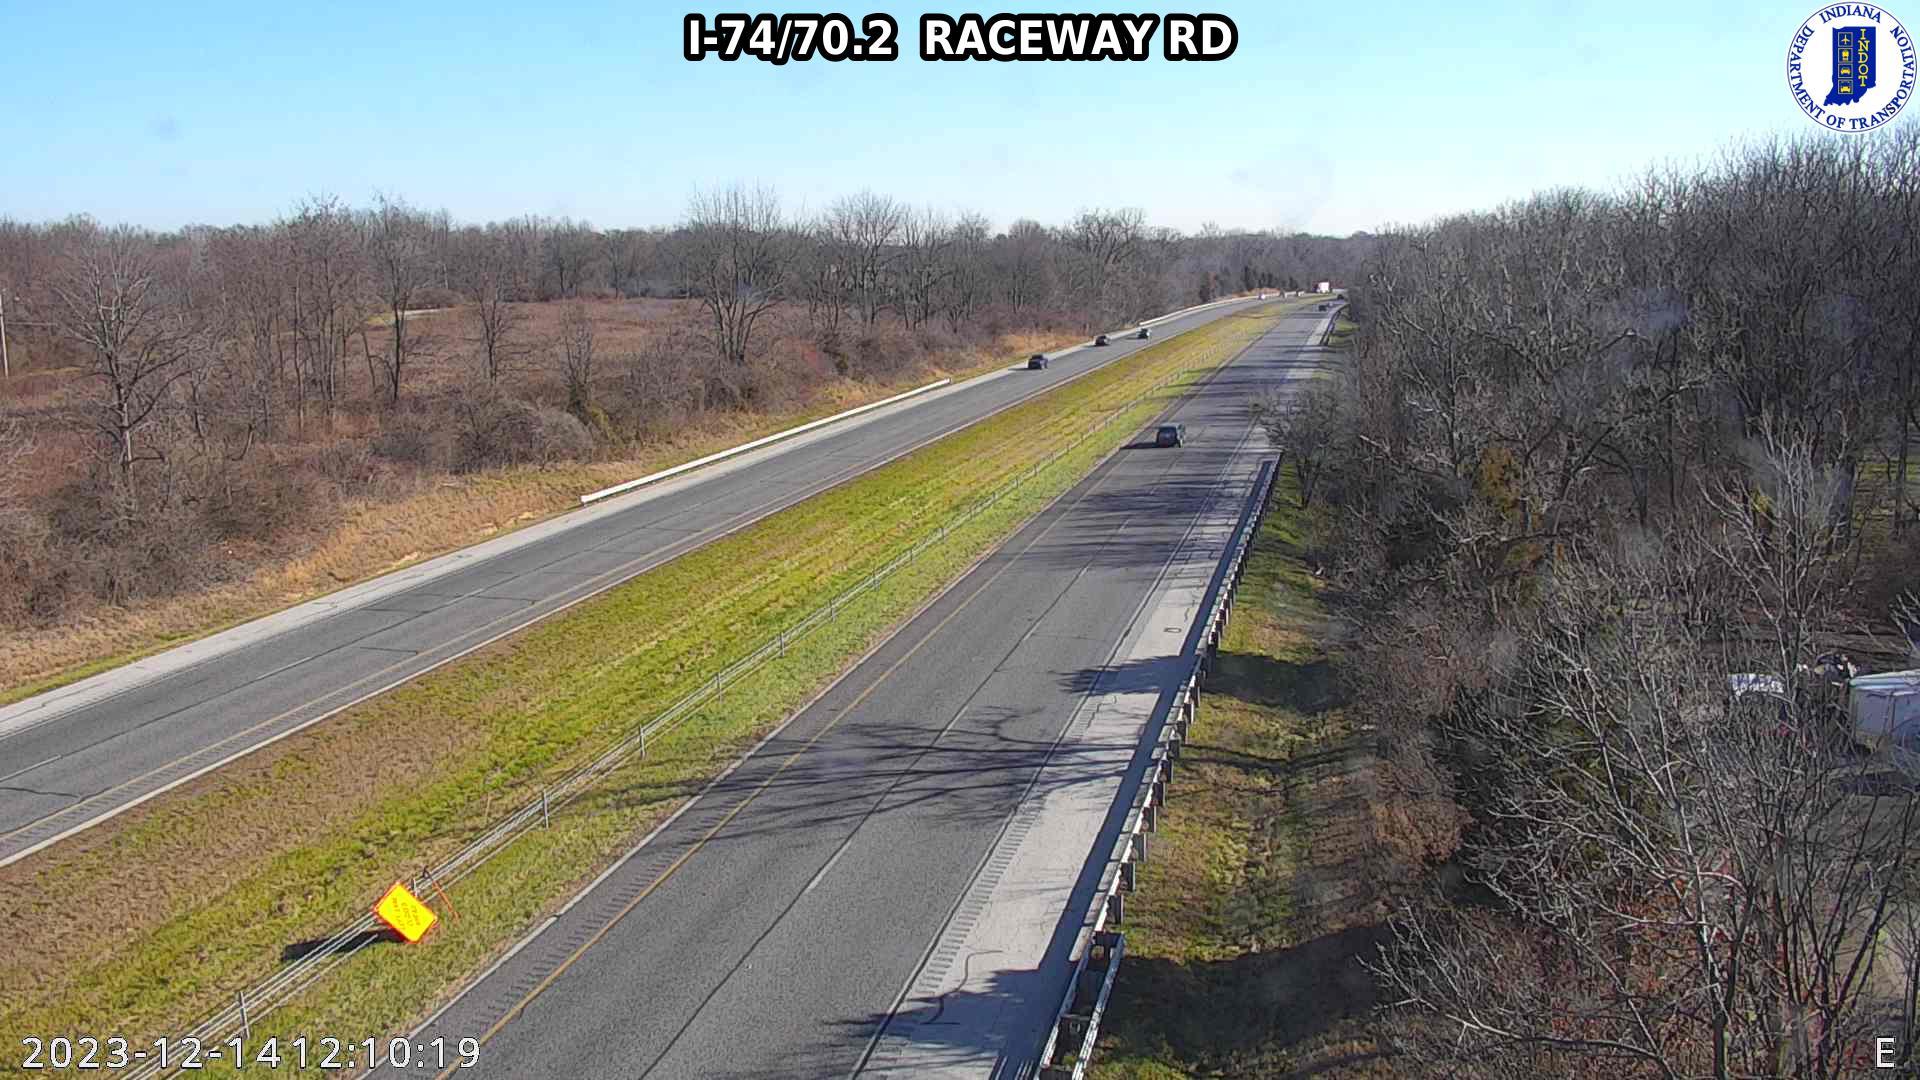 Traffic Cam Indianapolis: I-74: I-74/70.2 RACEWAY RD Player